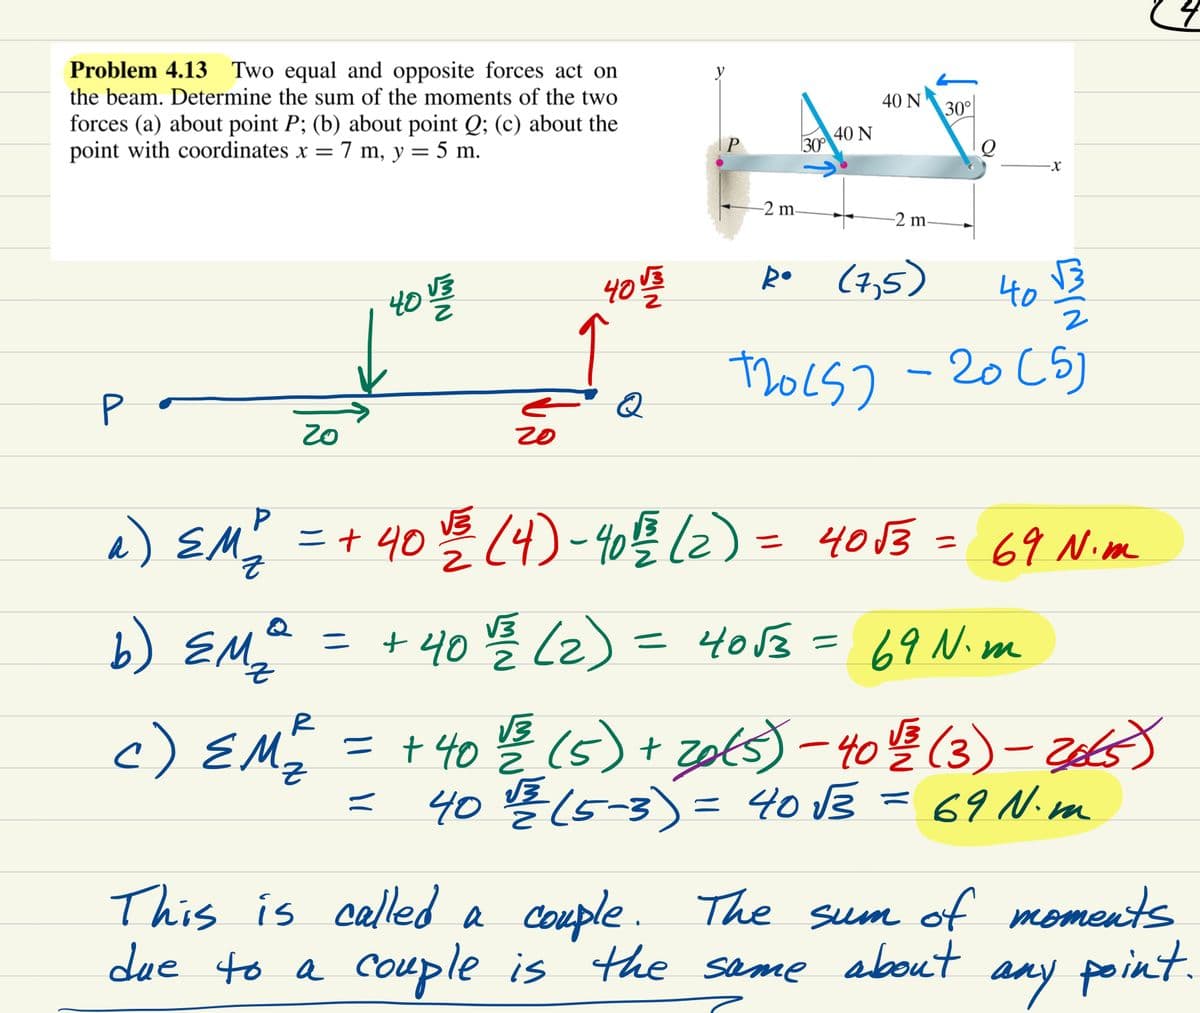 Problem 4.13 Two equal and opposite forces act on
the beam. Determine the sum of the moments of the two
forces (a) about point P; (b) about point Q; (c) about the
point with coordinates x = 7 m, y = 5 m.
P
a) EM₂
Z
Zo
b) EM ²
MIN
40 VE
20
40153353
IN
Q
-2 m-
30°
40 N
This is called a couple.
due to a
40 N
-2 m.
30°
P
= + 40 v ₂² (4) - 401/²2 (2) = 40√3 = 69 N·m
Ro (7,5) 401/2
2
12015) - 20 (5)
=
+ 40 1/²2 (2) = 40√3 = 69 N.m
-X
R
√√3
c) EM = 40 (5) + 2065) - H0V (3) 265)
z
2
=
40 1/² (5-3) = 40√3
69 №.m
-
4
The sum of moments
couple is the same about
any point.